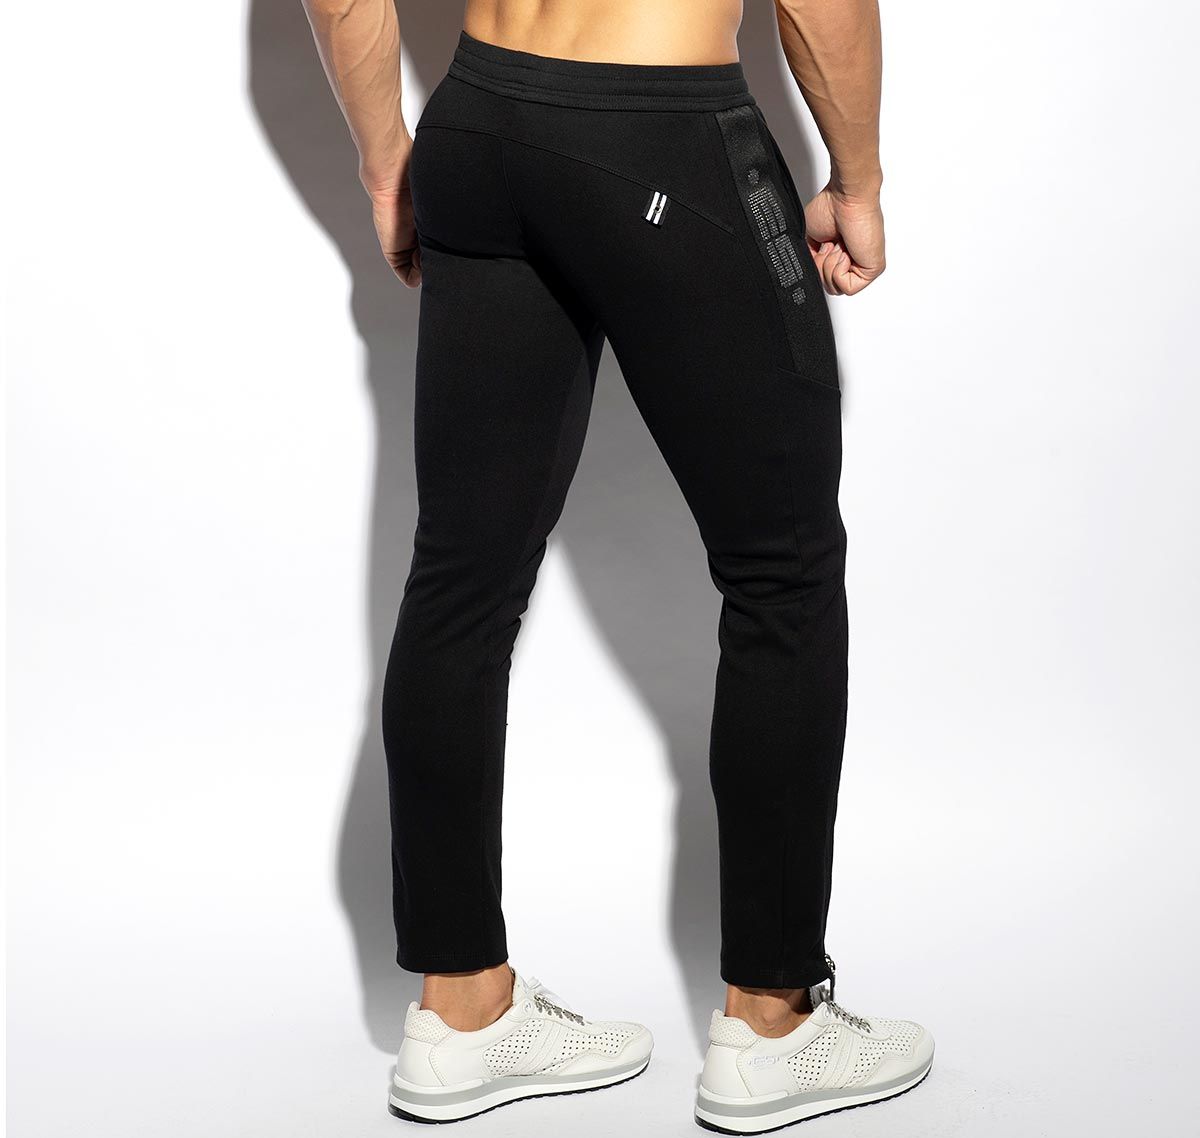 ES Collection Pantaloni sportivi lunghi FIRST CLASS ATHLETIC PANTS SP294, nero